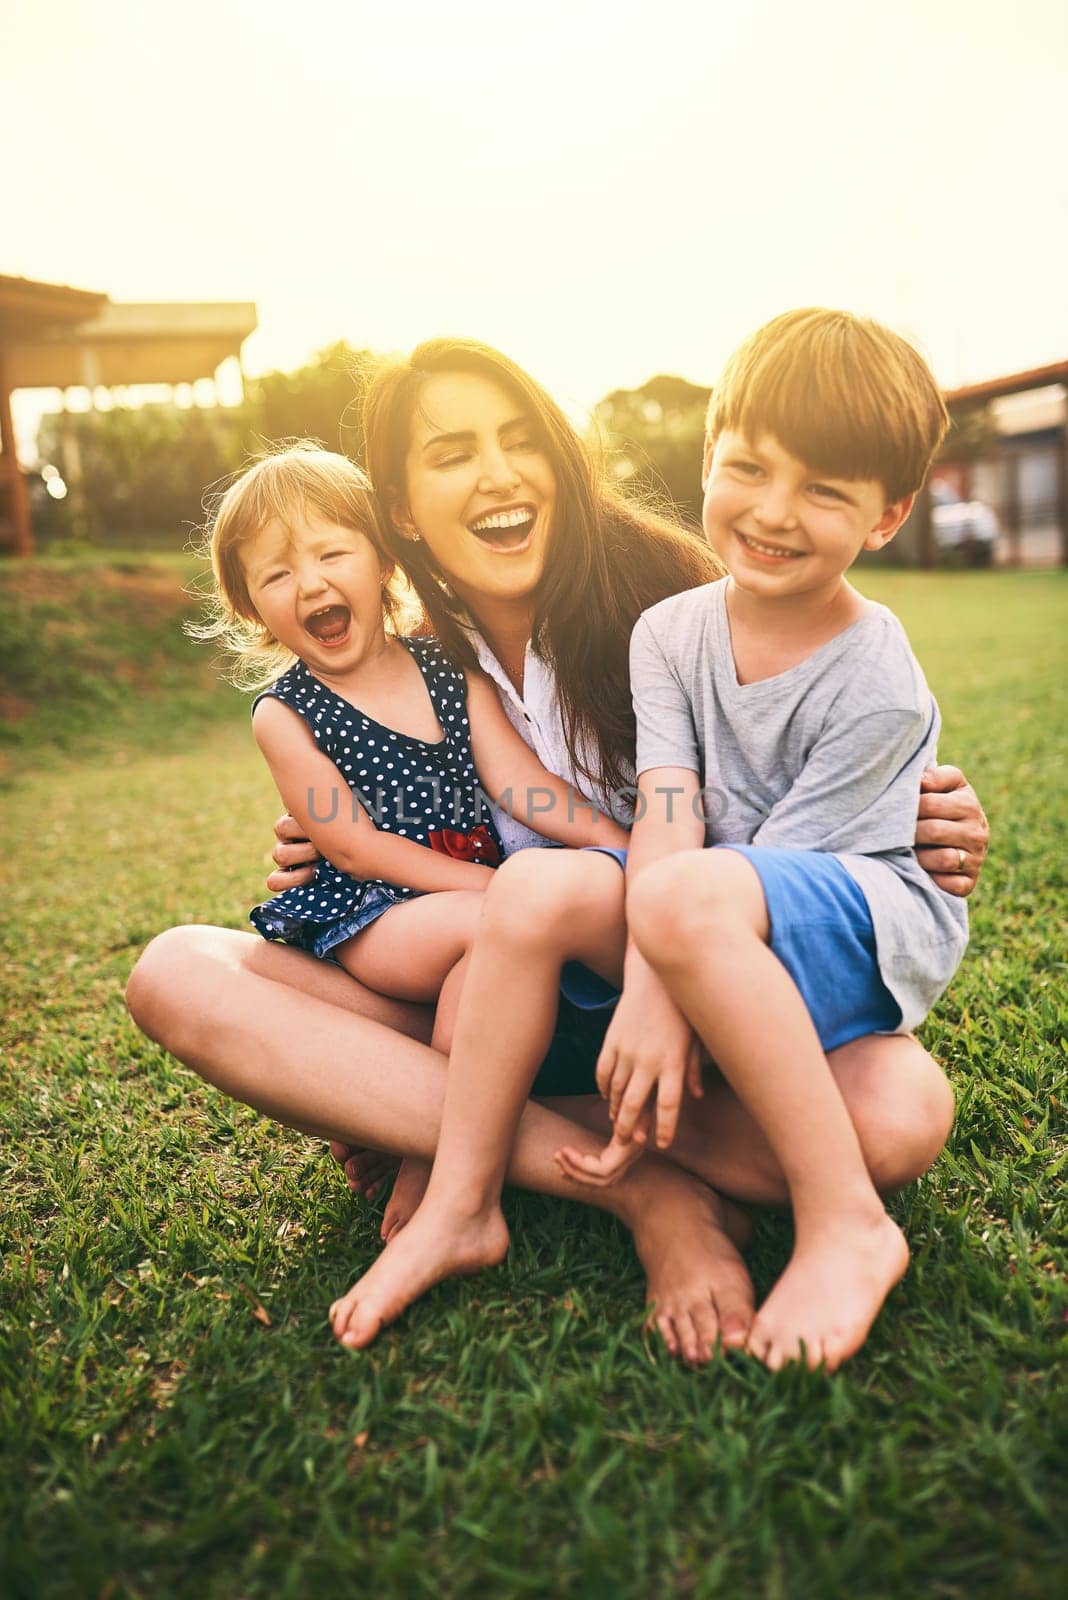 Mother, happy kids or hug playing on grass for fun bonding in summer outside a house in nature. Funny mom hugging playful children on garden playground outdoors with happiness of family together.